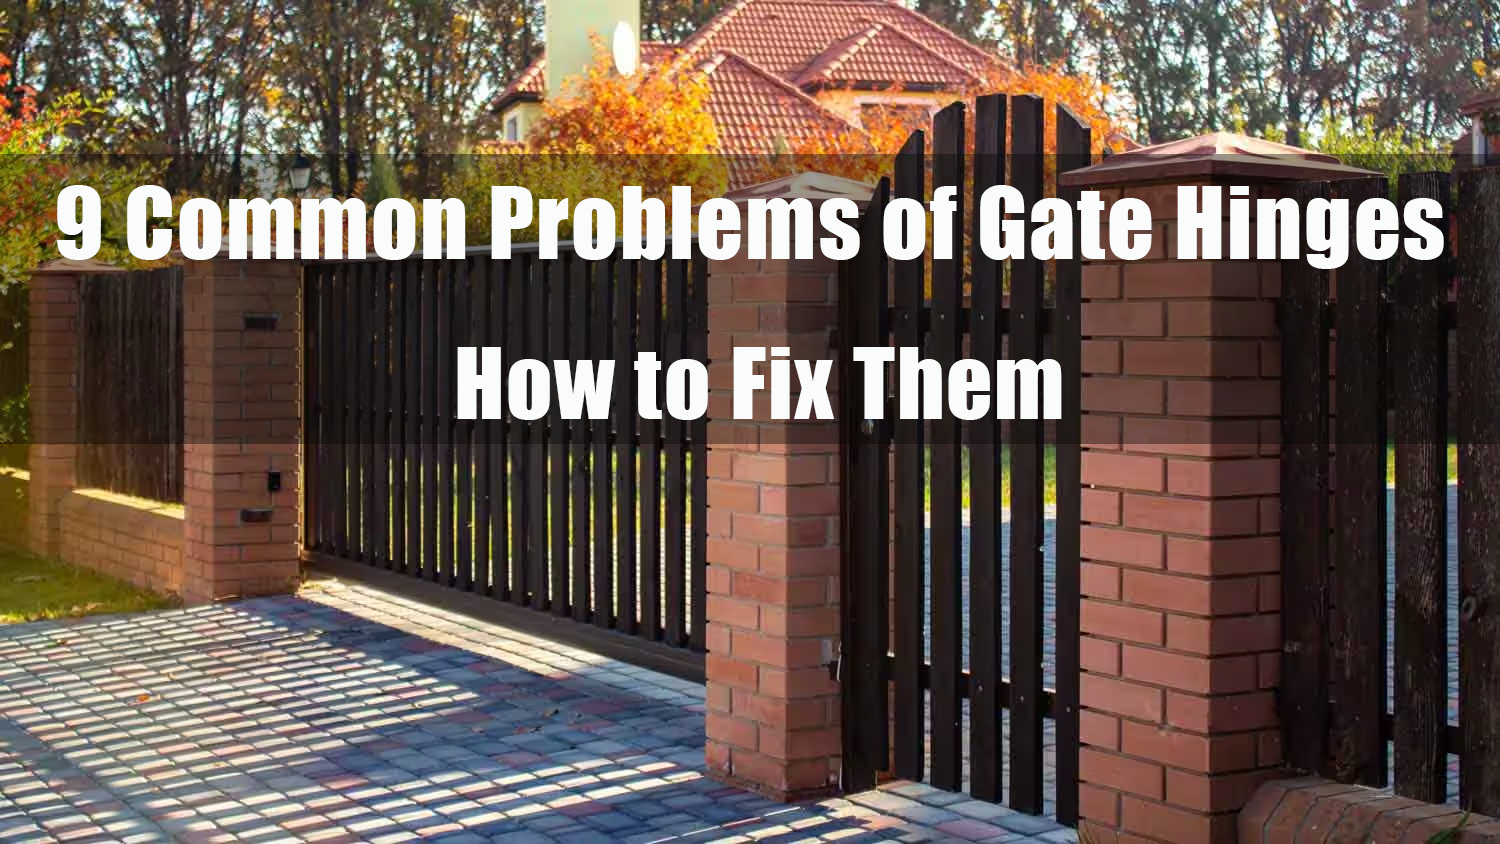 9 Common Problems and fixes of Gate Hinges